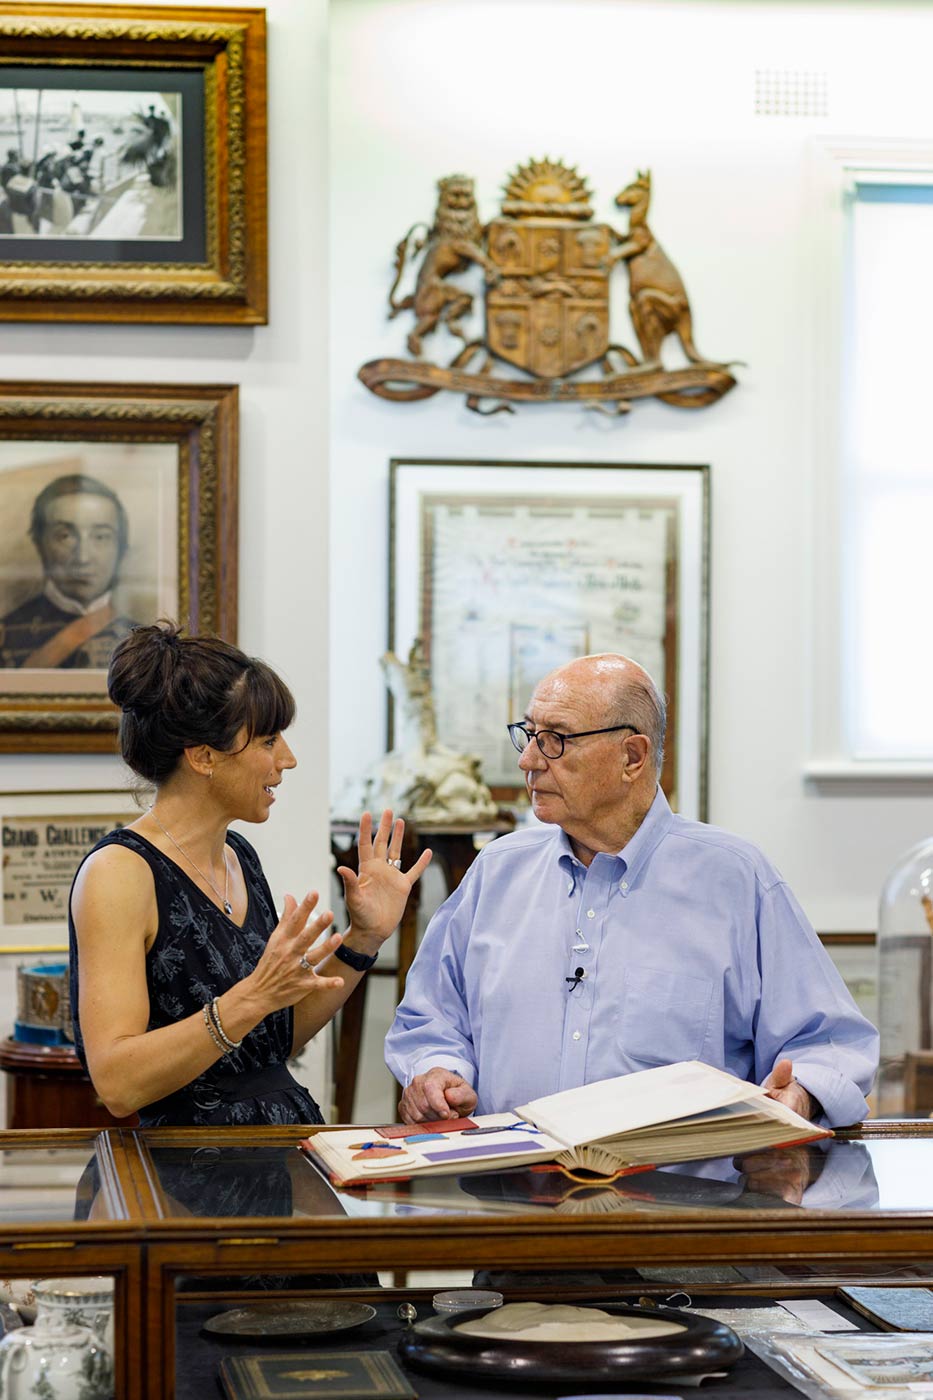 Colour photograph of a woman and man in discussion in a room featuring various antique collectible objects. - click to view larger image